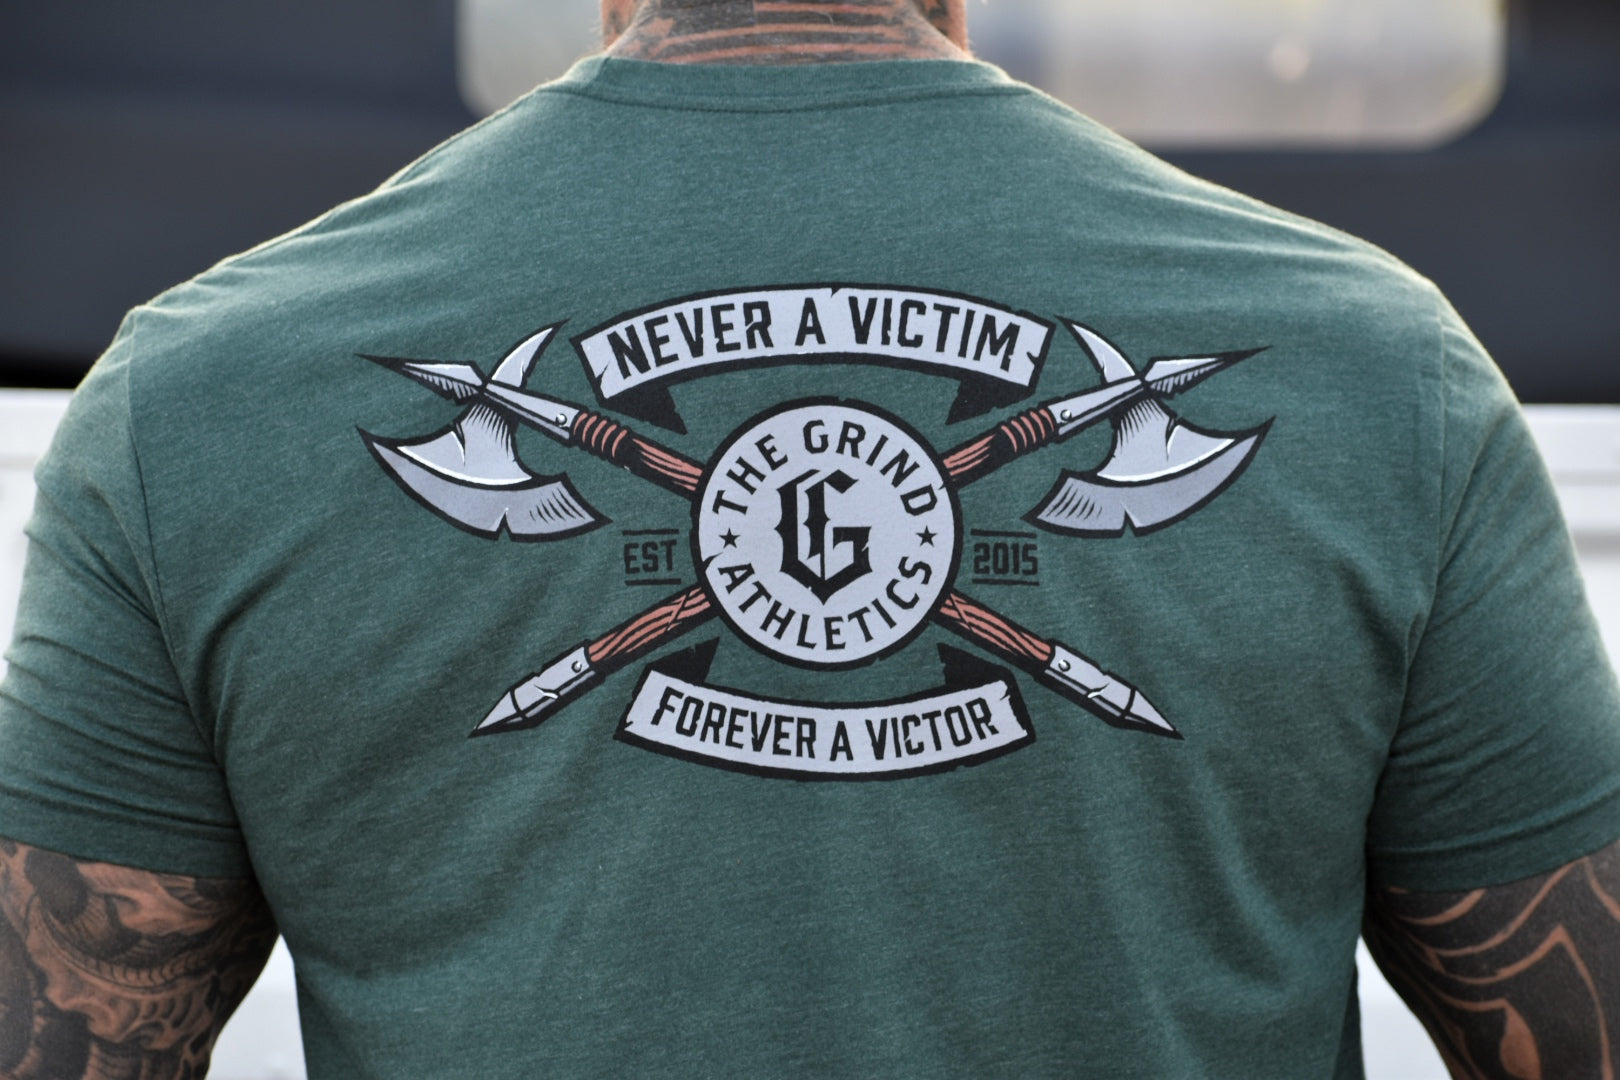 The Grind Athletics Never a Victim - Forever a Victor